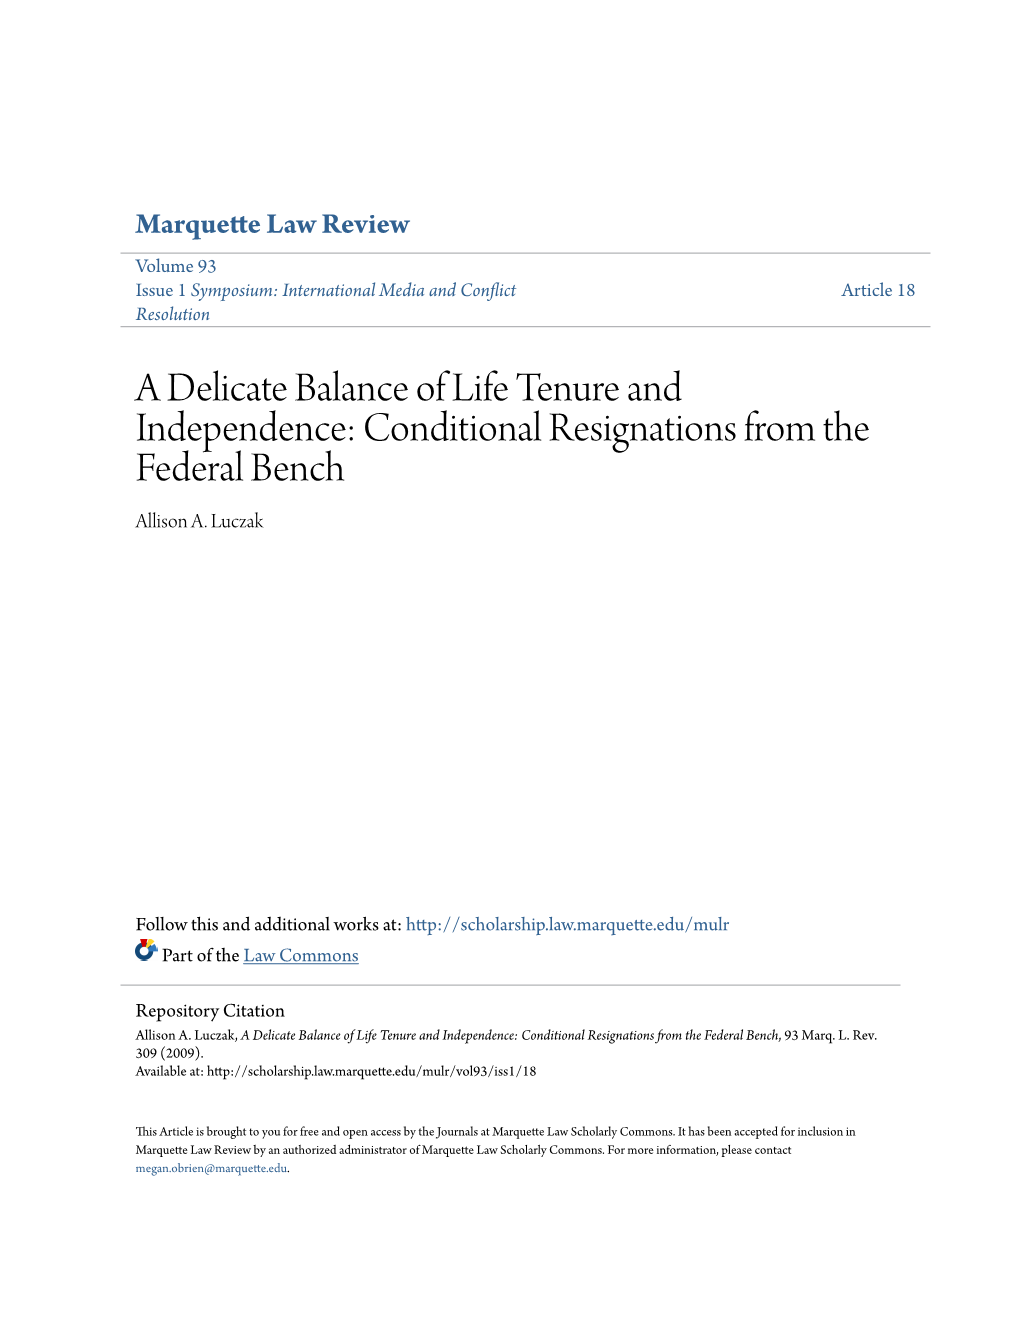 A Delicate Balance of Life Tenure and Independence: Conditional Resignations from the Federal Bench Allison A